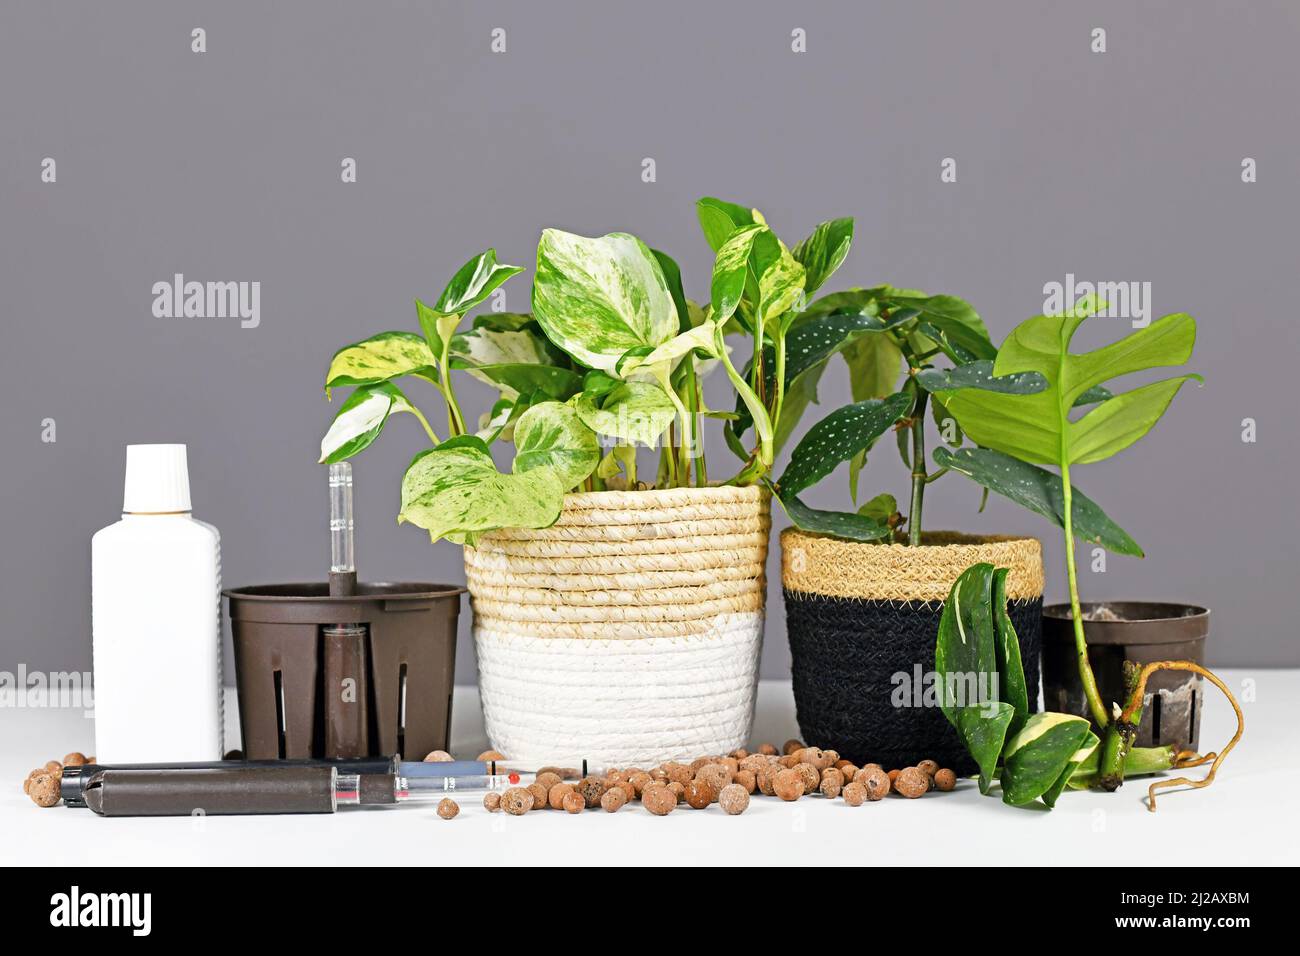 Various tools for keeping houseplants in passive hydroponics clay pellets system Stock Photo